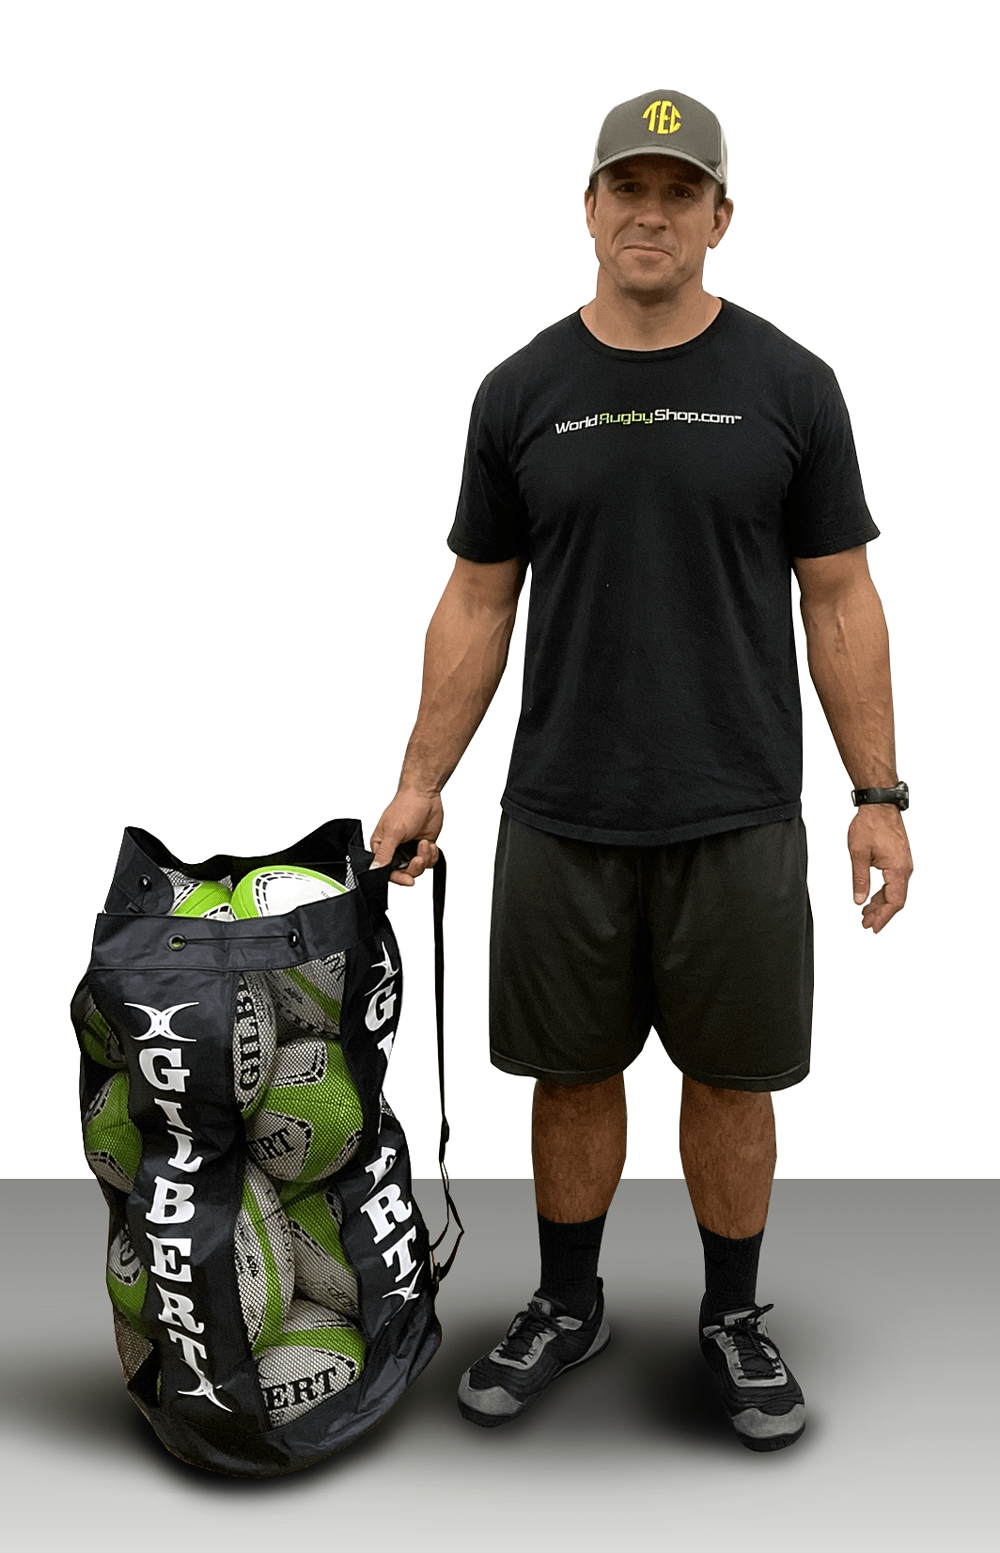 FORZA Full-Height Rugby Tackle Bag [5 Sizes] | PRO GRADE TRAINING EQUIPMENT  | eBay